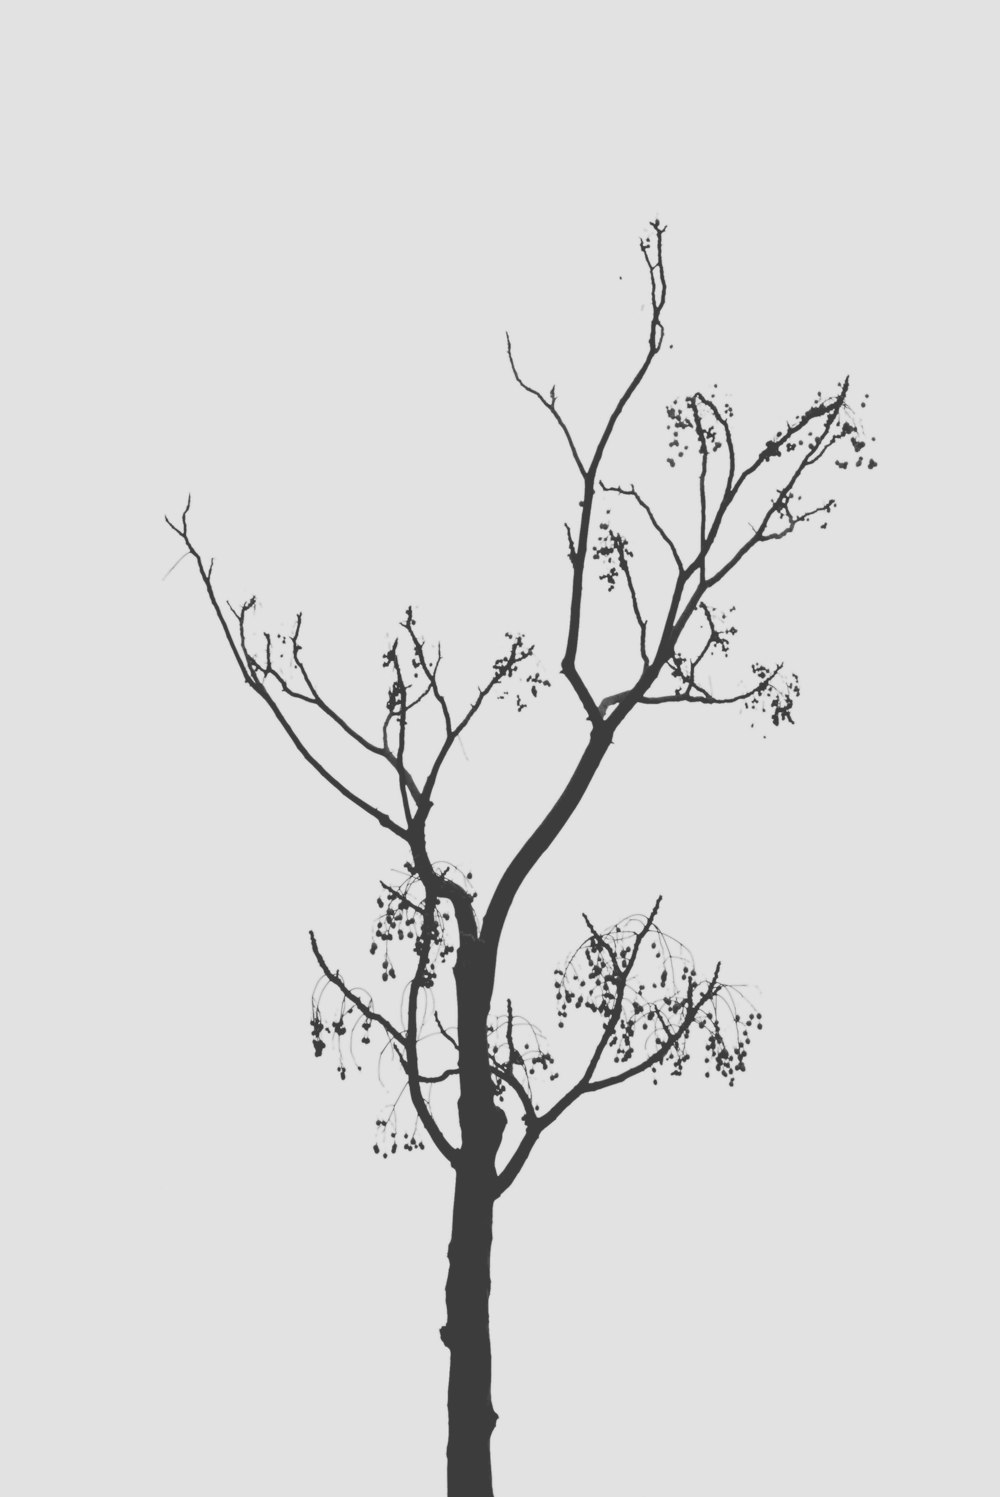 a black and white photo of a tree with no leaves